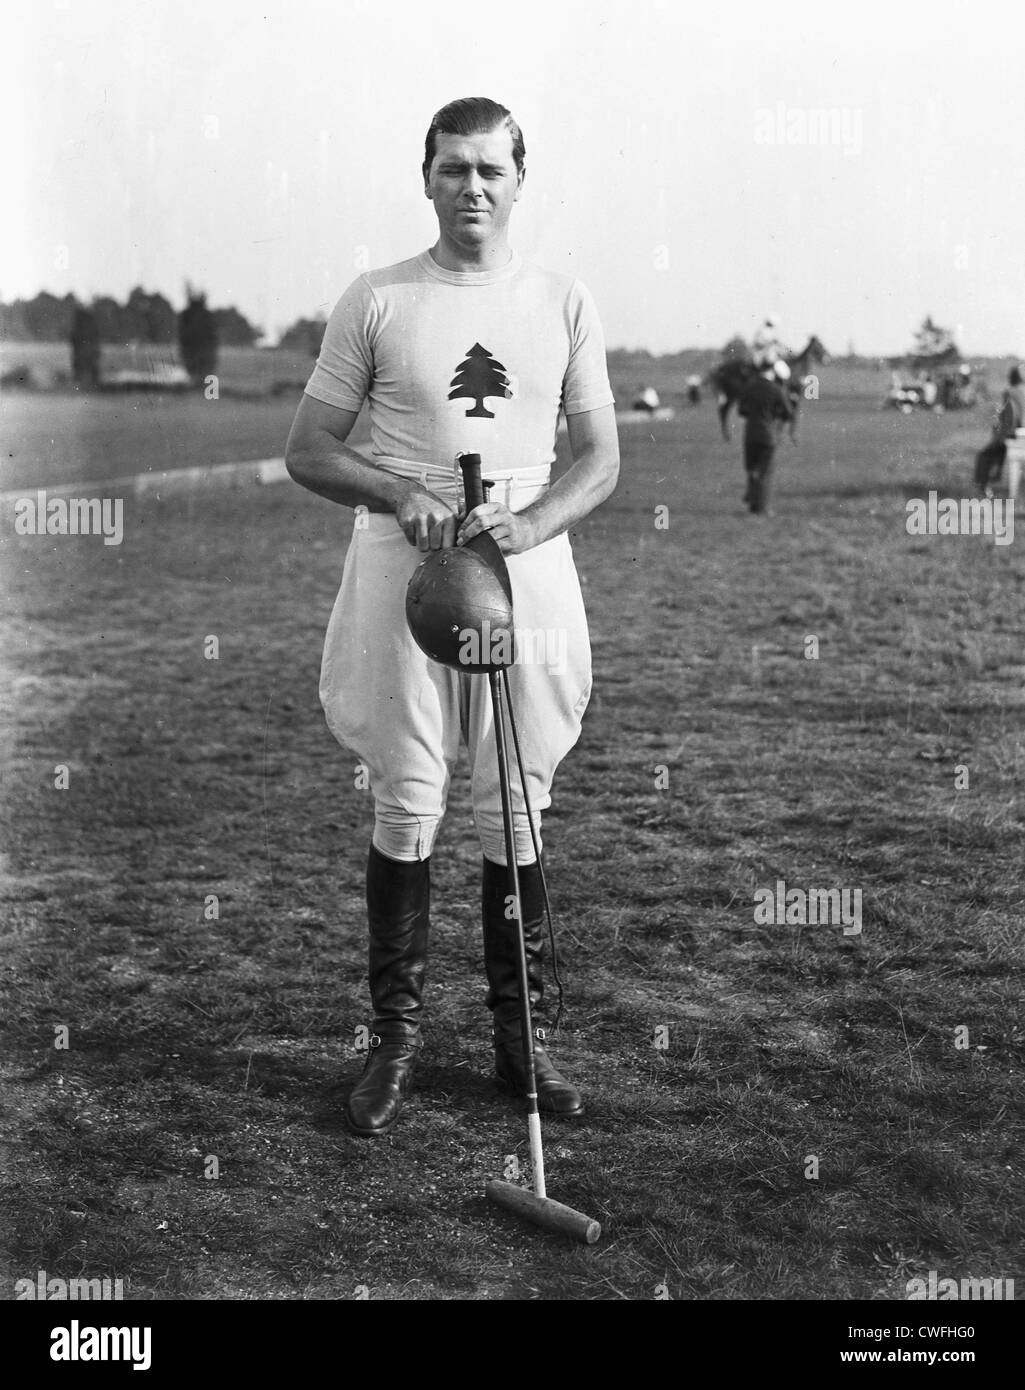 Gerald Balding of the Greentree Polo Team poses holding a polo mallet and helmet, ca 1934 Stock Photo